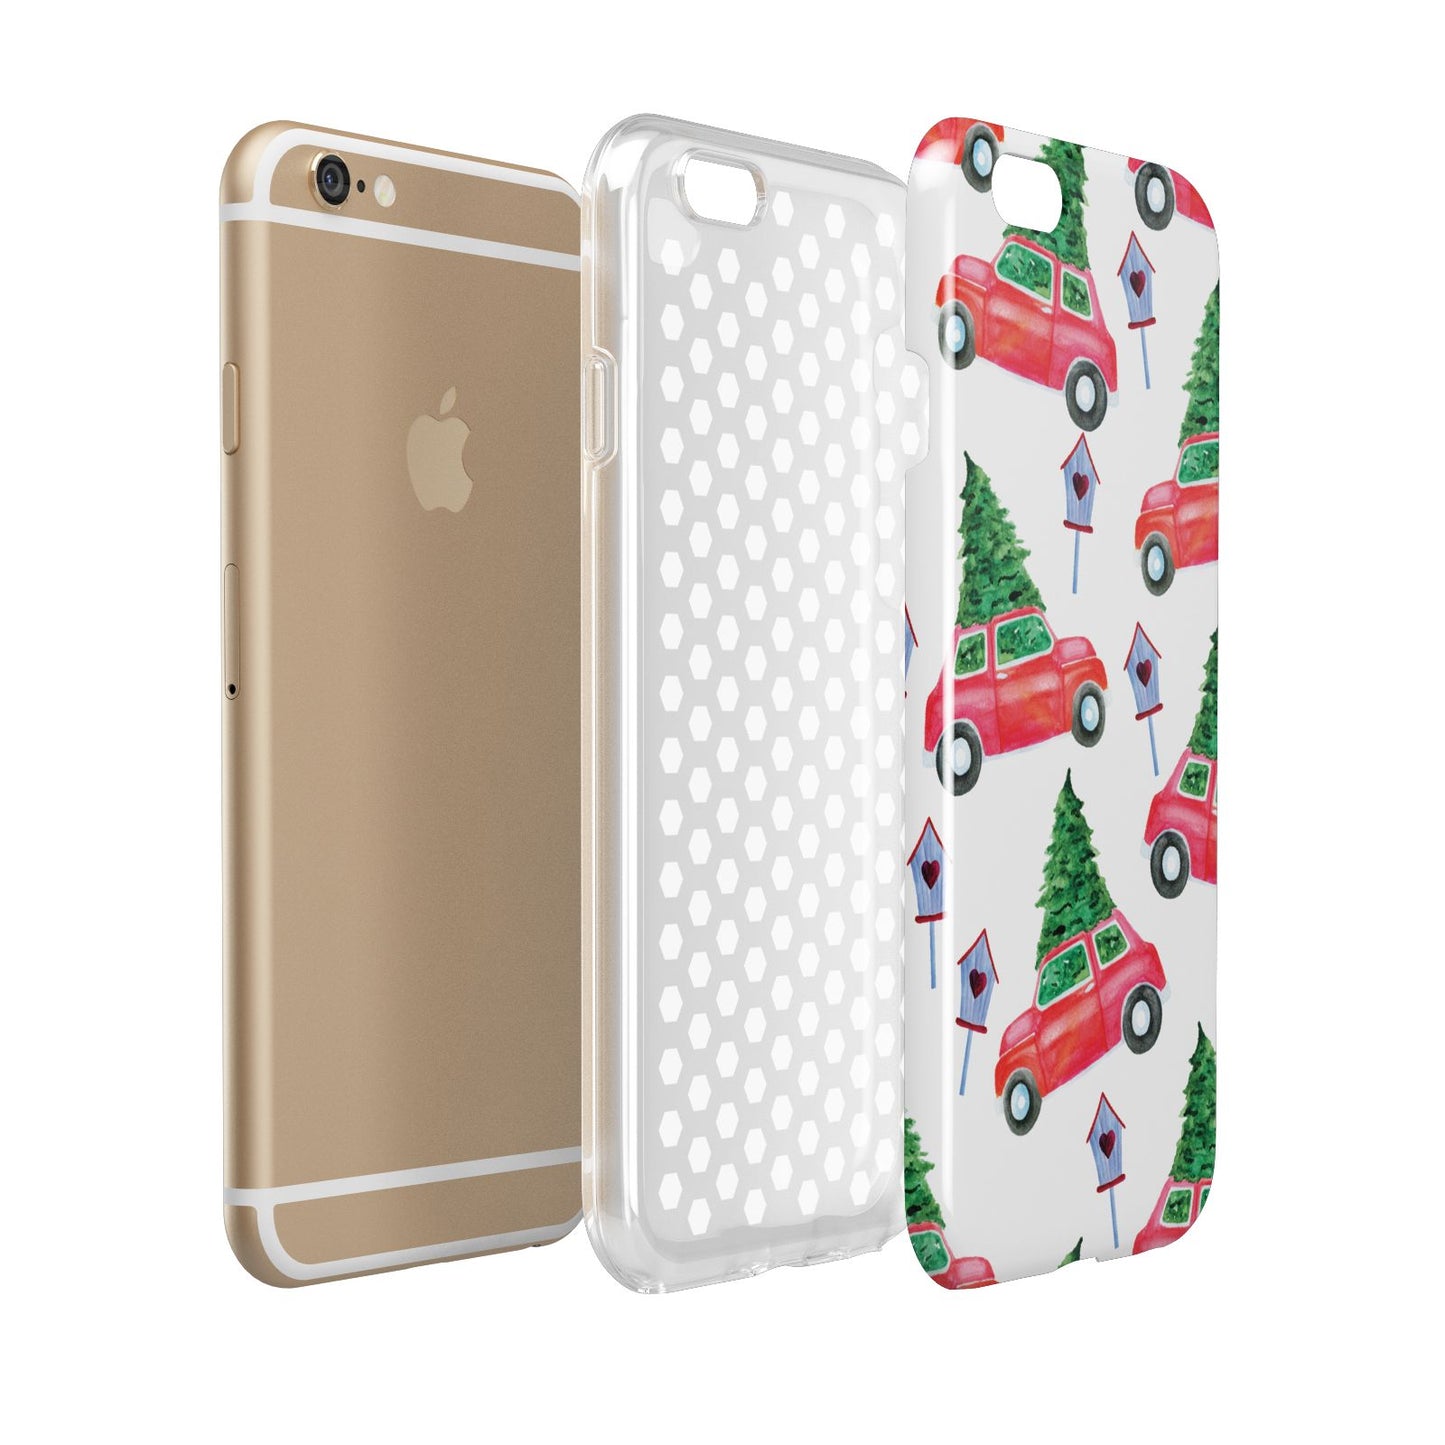 Driving home for Christmas Apple iPhone 6 3D Tough Case Expanded view